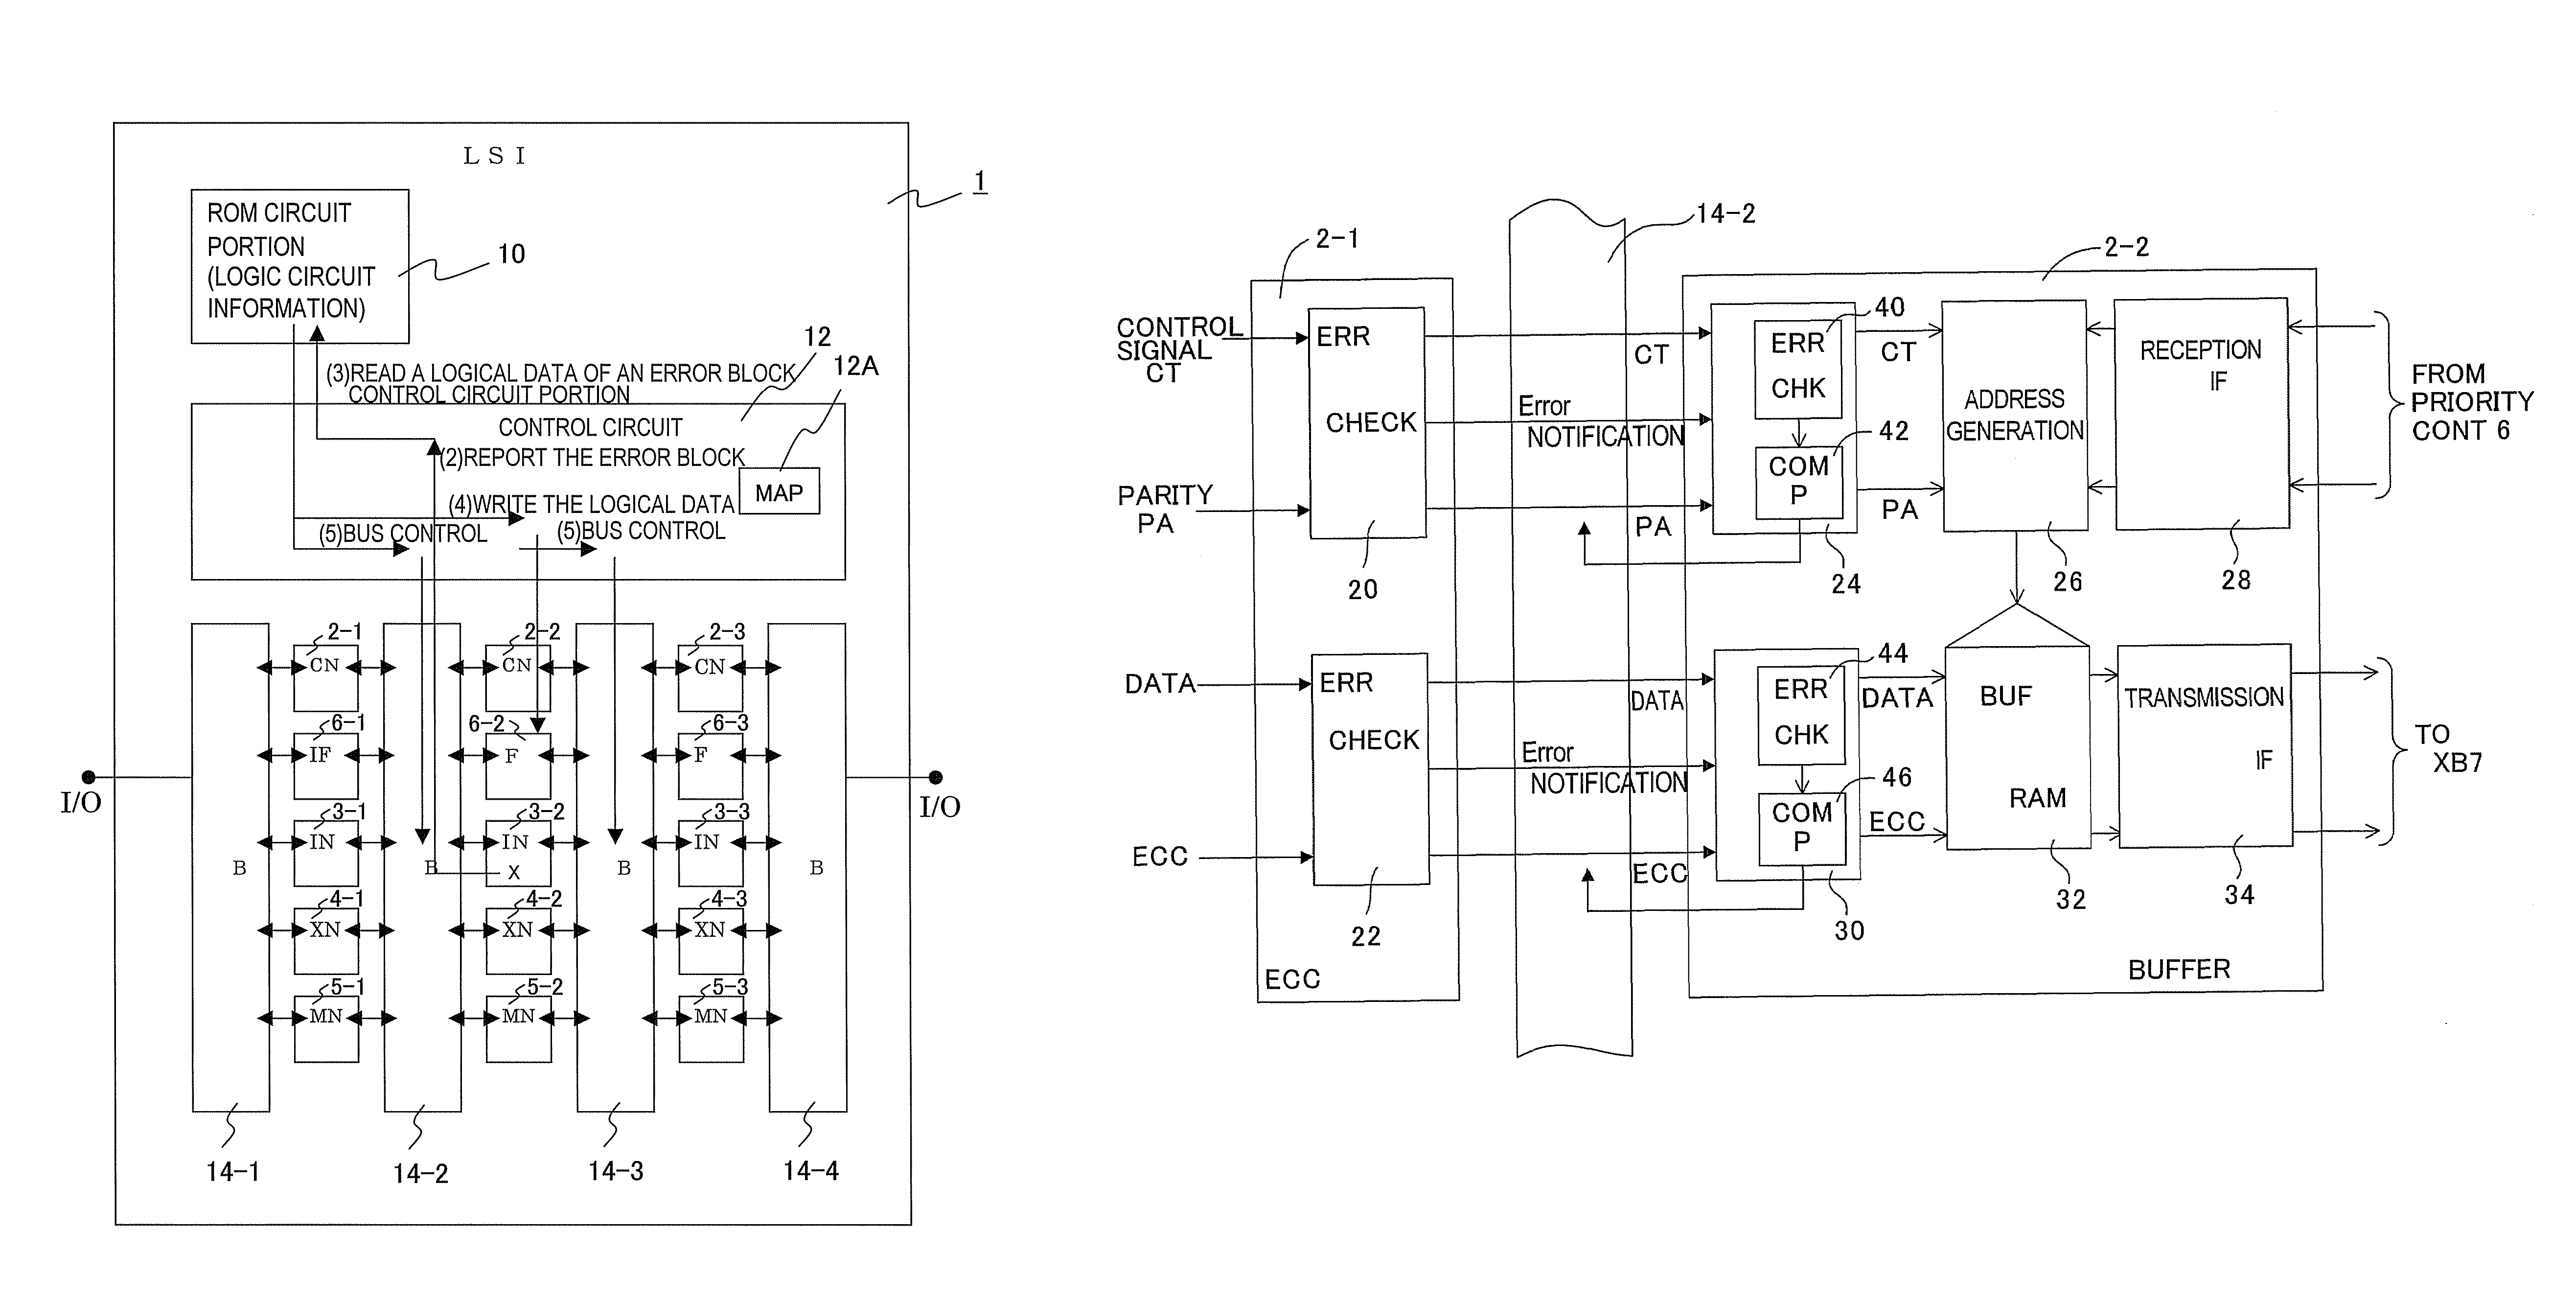 Logic integrated circuit having dynamic substitution function, information processing apparatus using the same, and dynamic substitution method of logic integrated circuit